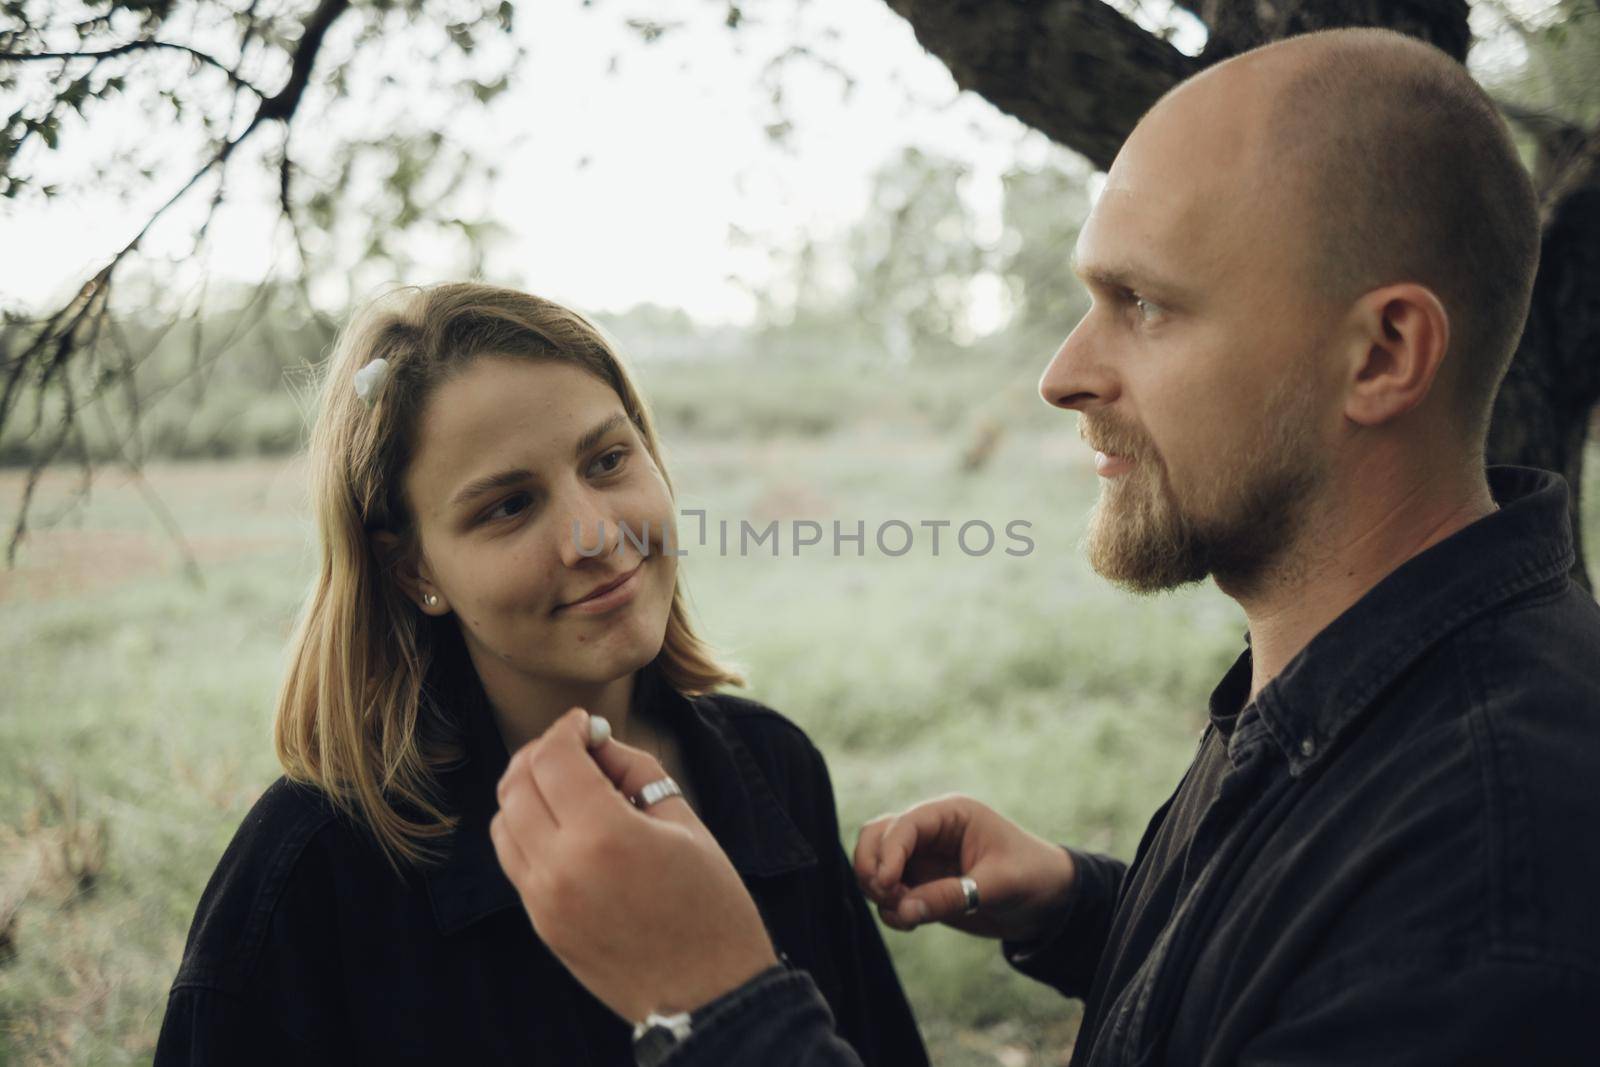 the guy places flowers in the hair of her beloved by Symonenko